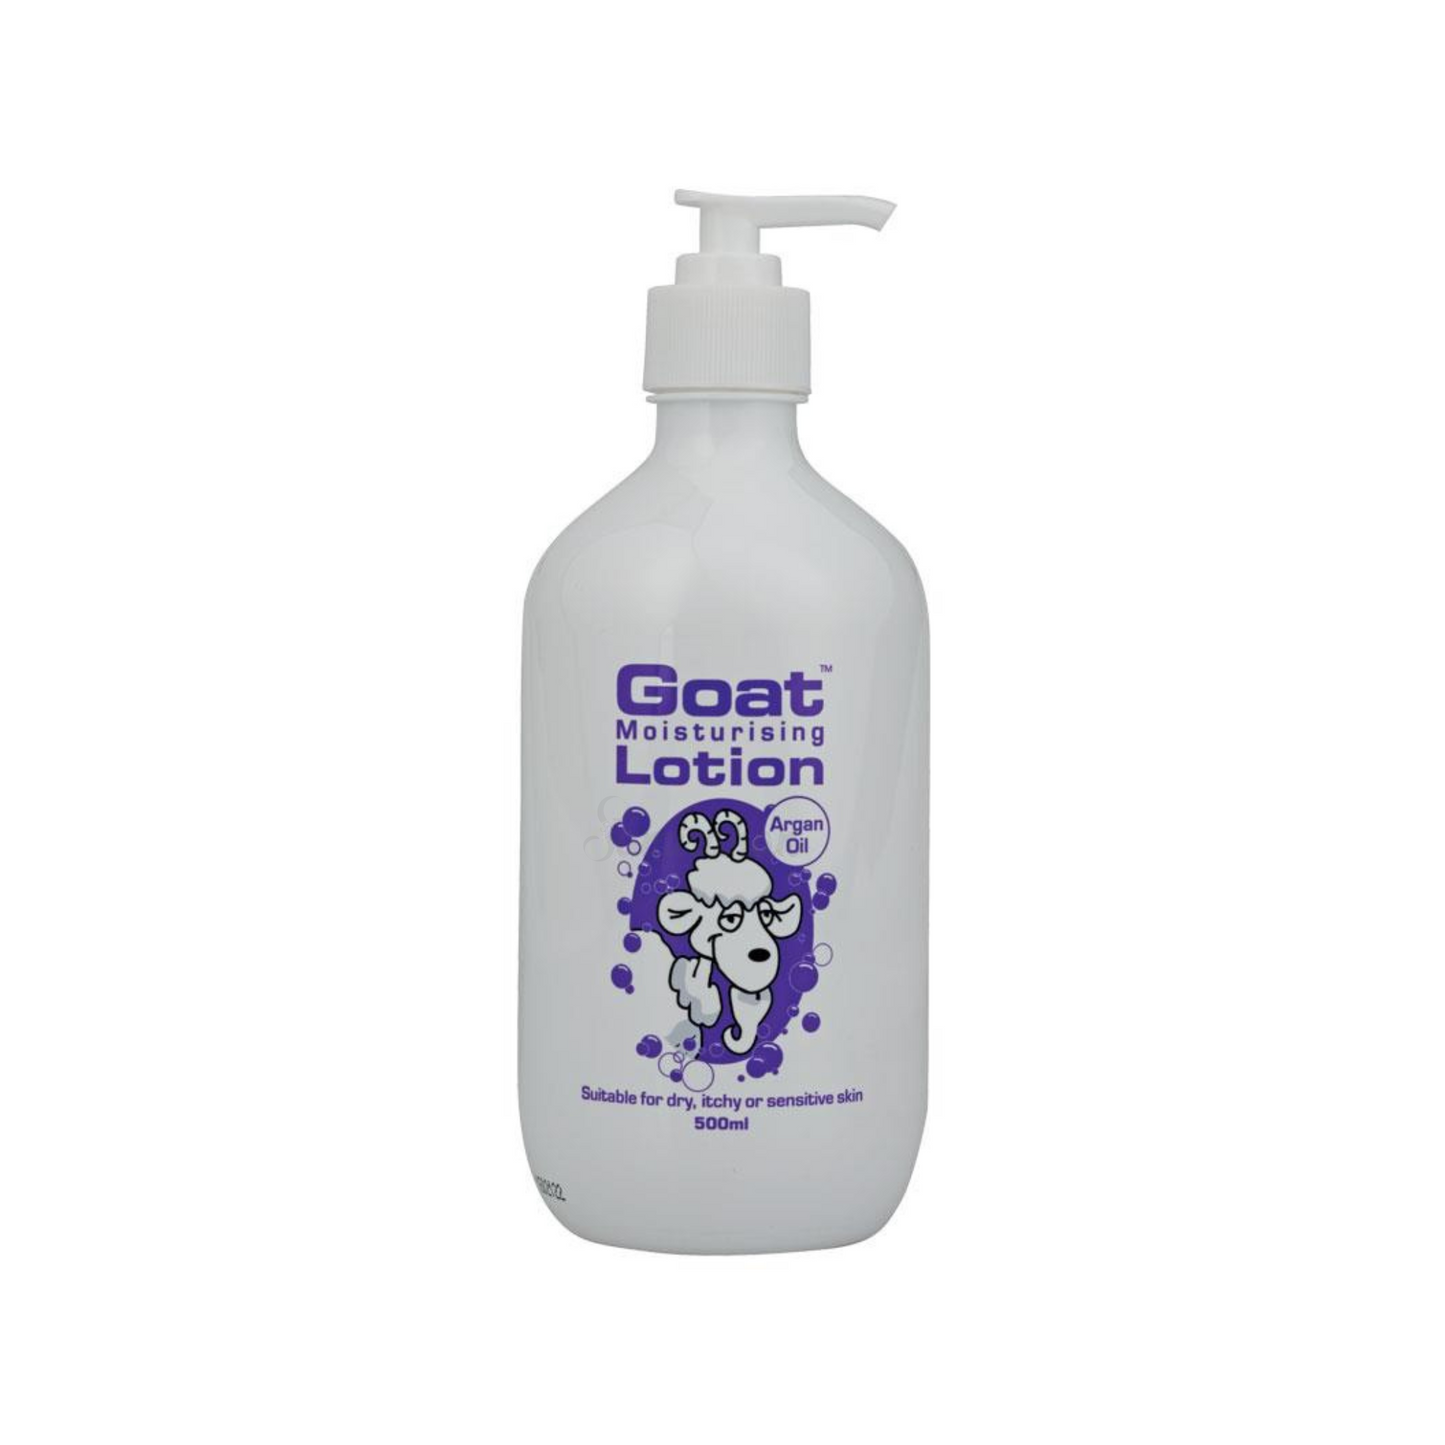 Goat Milk Moisturising Lotion is an exotic & fragrant lotion containing Argan Oil, Goat's Milk, Vitamin E & antioxidants that nourishes, smoothens & revitalizes your skin. Best imported foreign Australian Aussie genuine authentic premium quality real skincare beauty skin care price in Dhaka Chittagong Bangladesh.